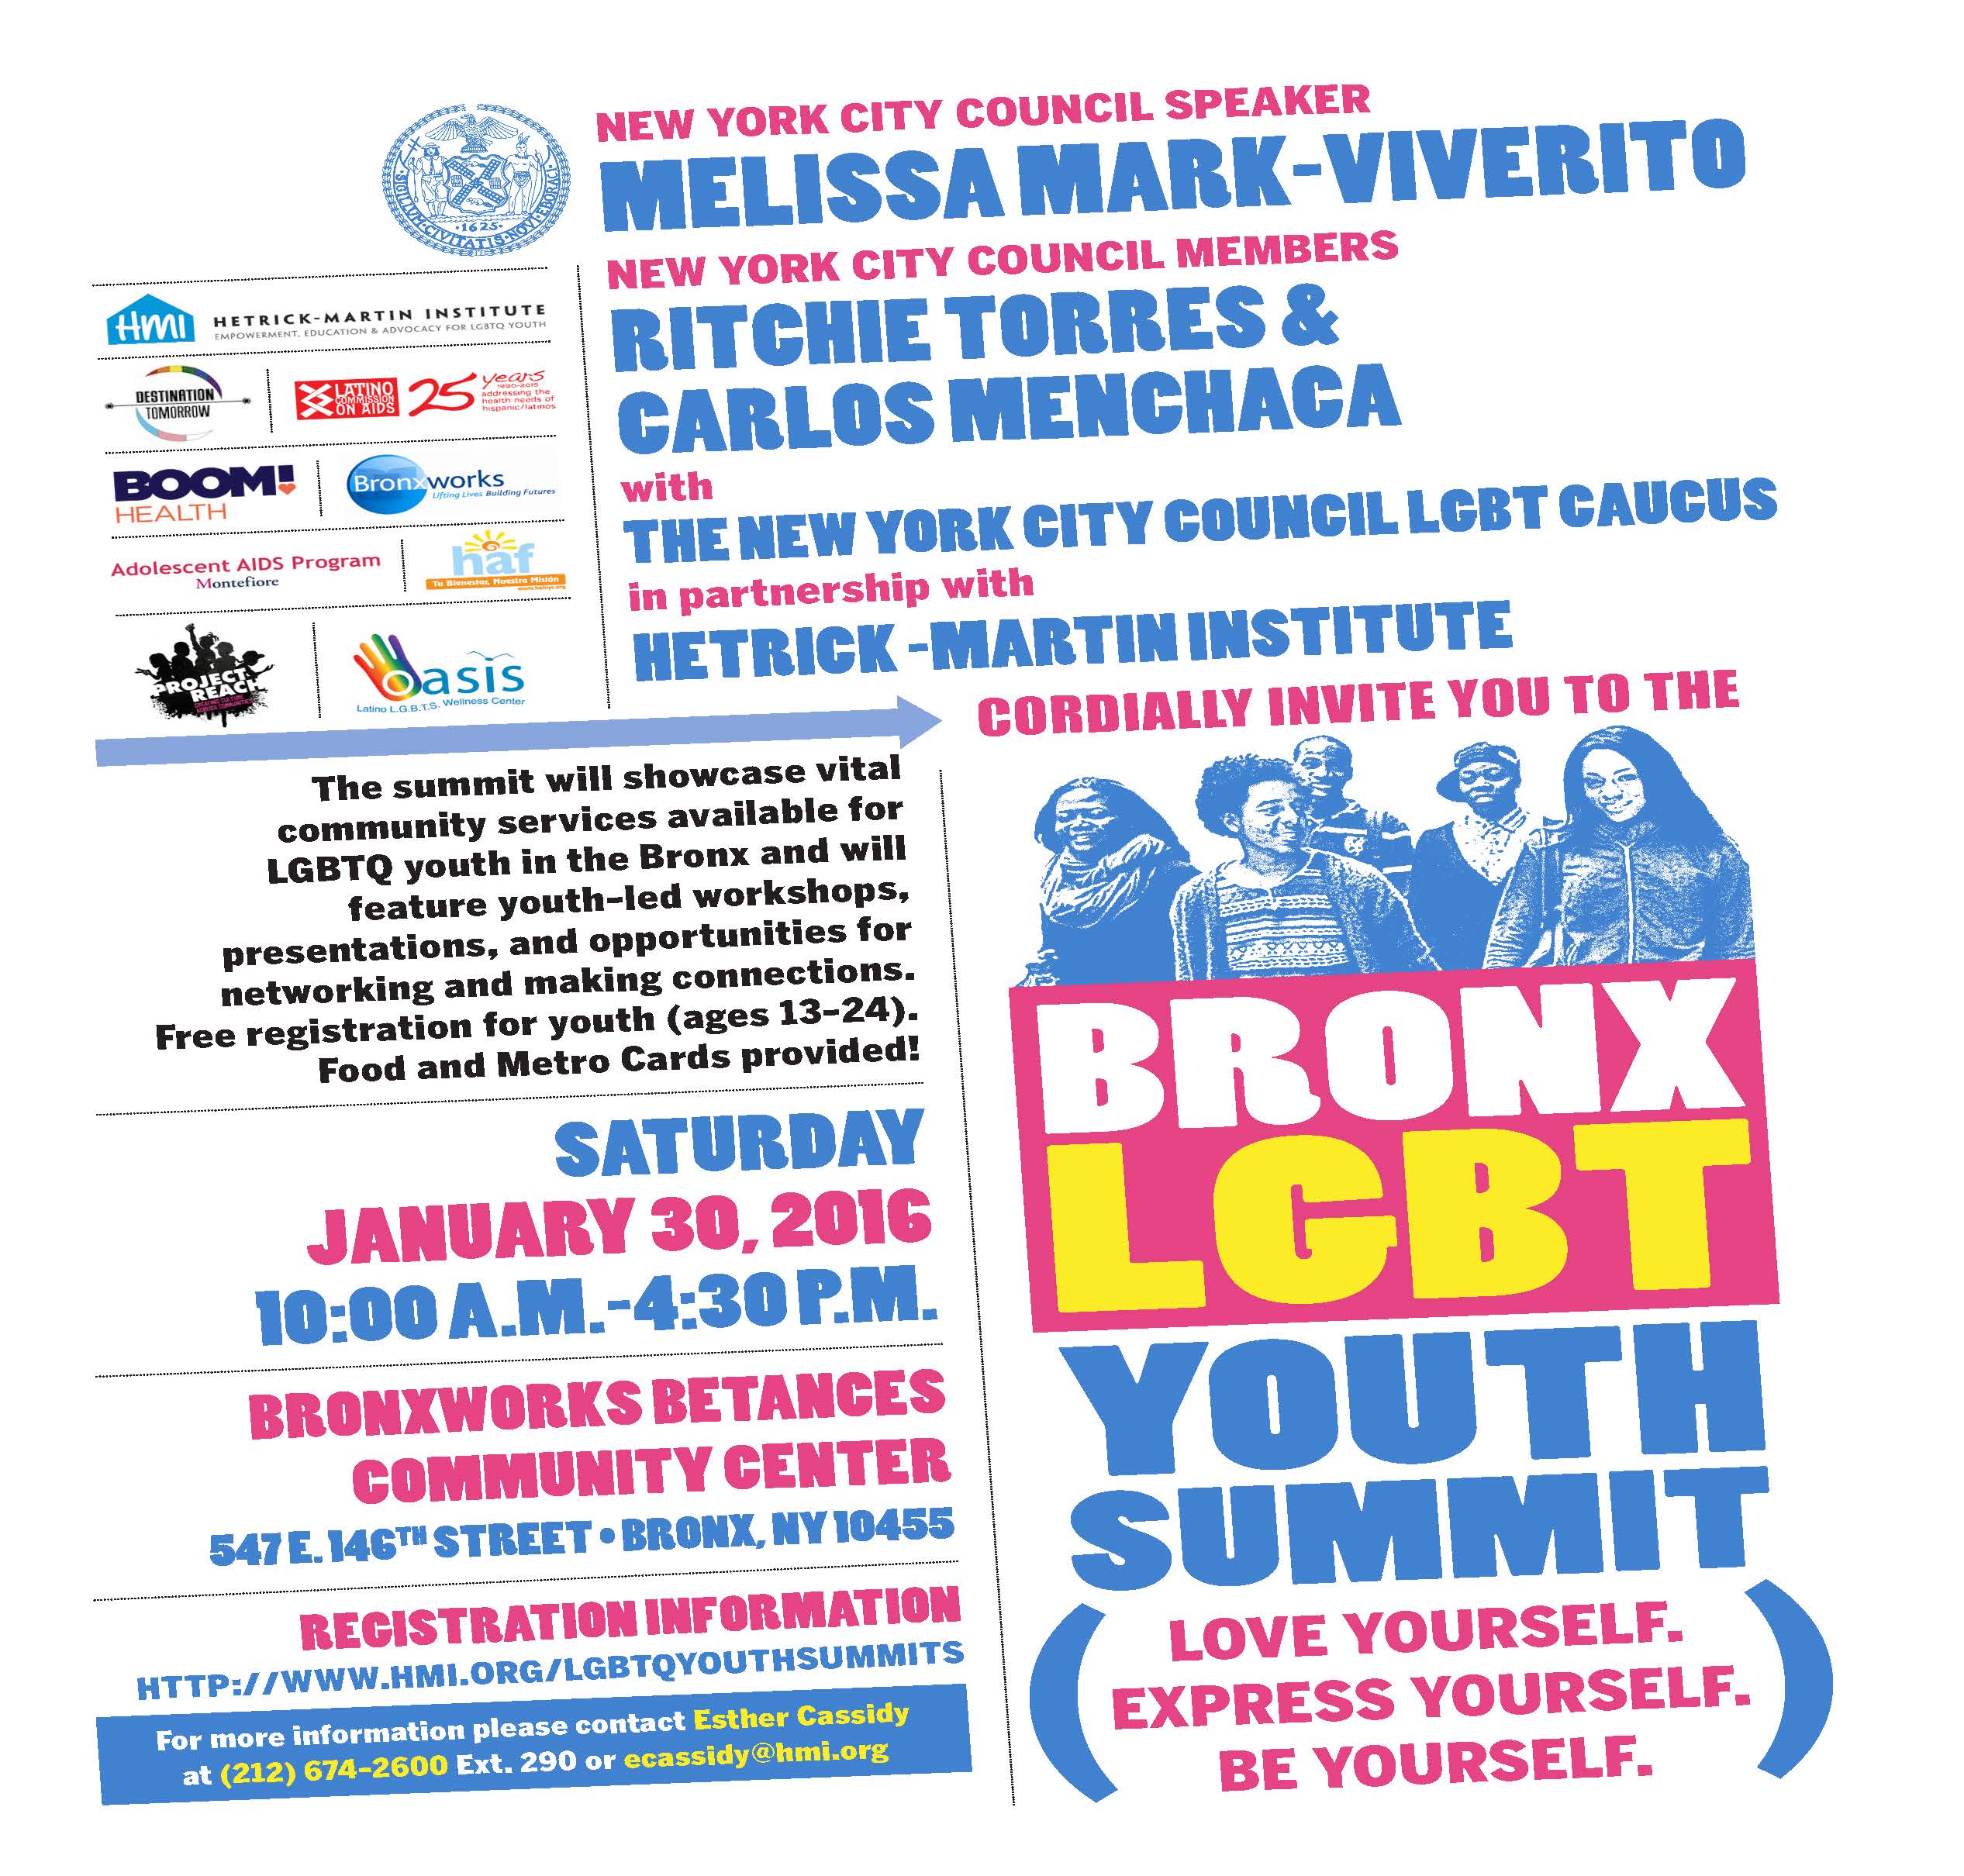 010416 FC15 TORRES LGBT Youth Summit (EngSpan) tagline Flyer- FINAL_Page_1